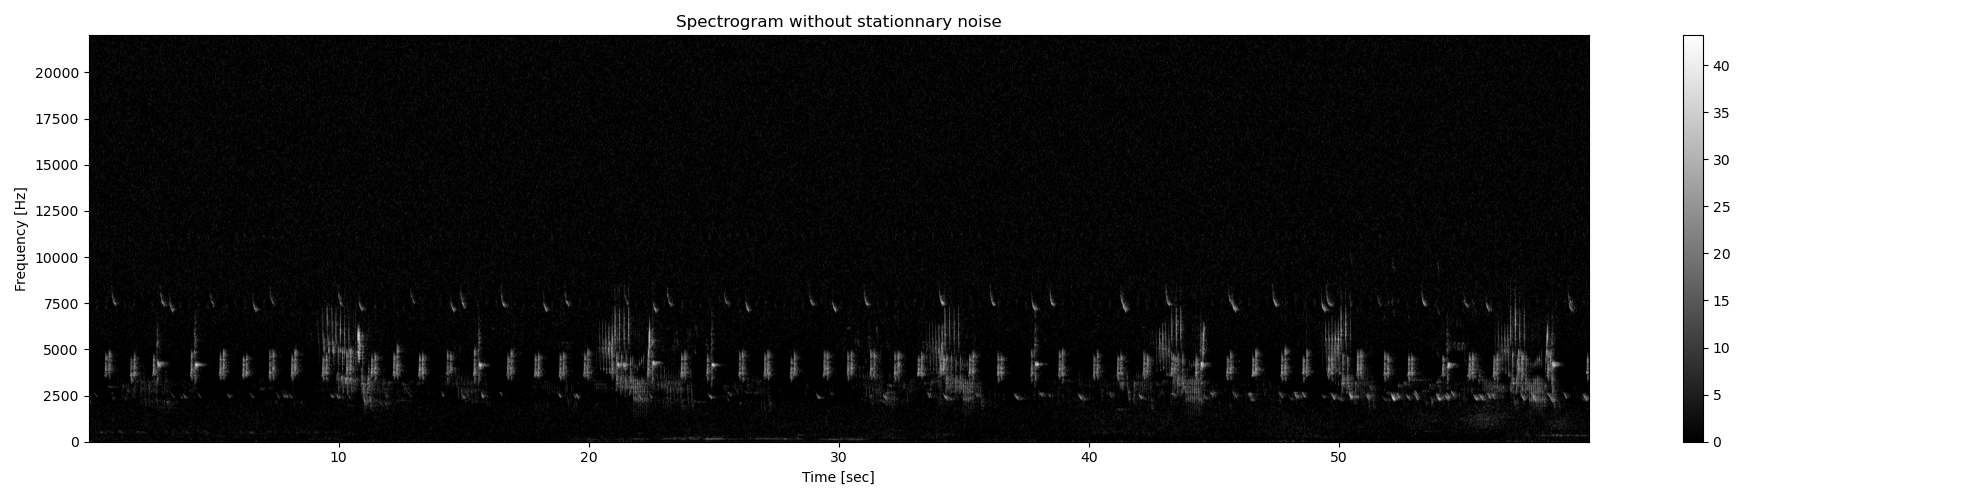 Spectrogram without stationnary noise